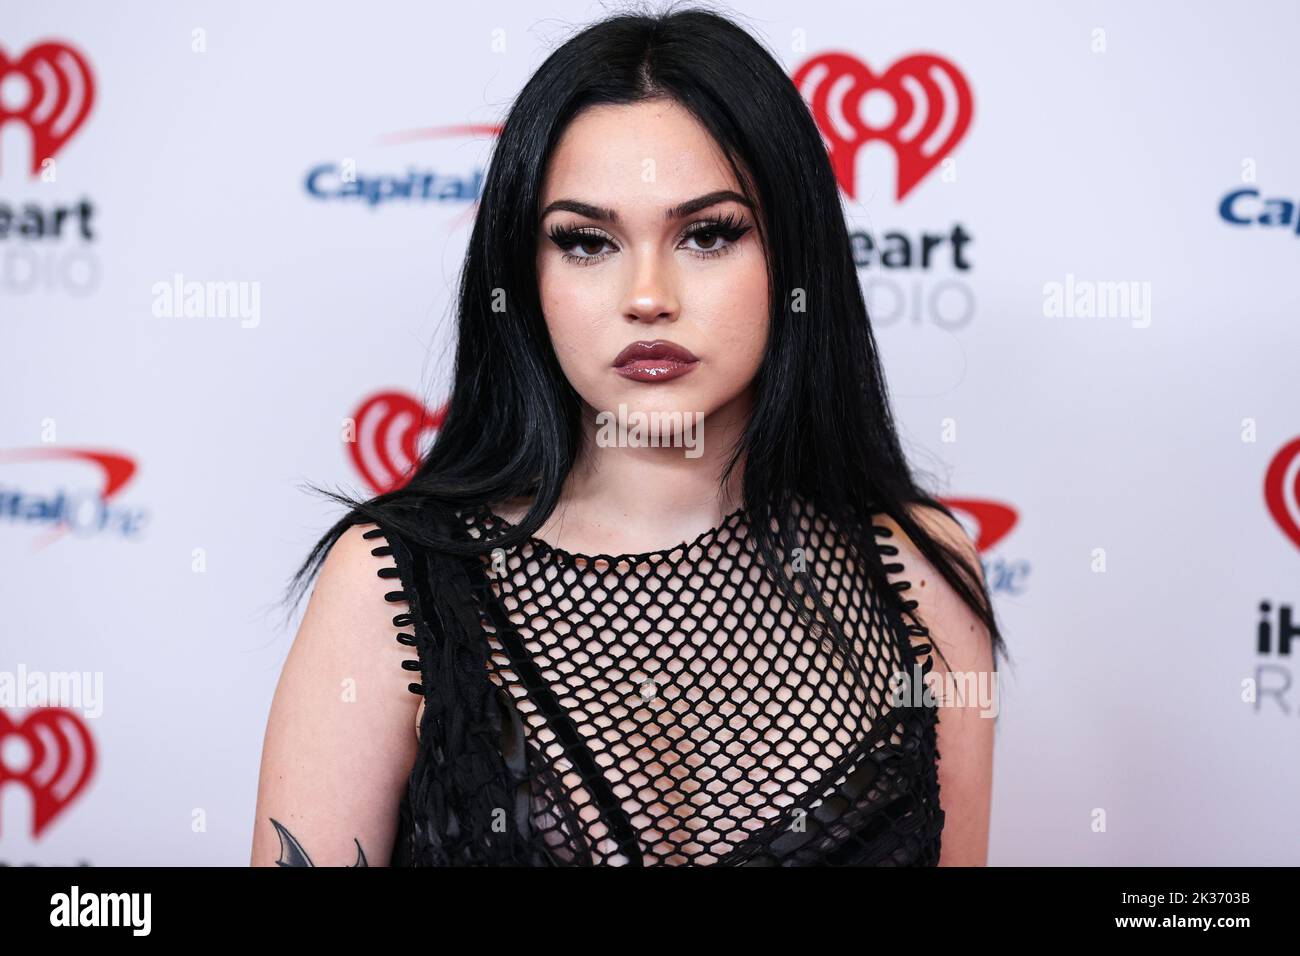 Las Vegas, United States. 24th Sep, 2022. LAS VEGAS, NEVADA, USA - SEPTEMBER 24: Maggie Lindemann poses in the press room at the 2022 iHeartRadio Music Festival - Night 2 held at the T-Mobile Arena on September 24, 2022 in Las Vegas, Nevada, United States. (Photo by Xavier Collin/Image Press Agency) Credit: Image Press Agency/Alamy Live News Stock Photo